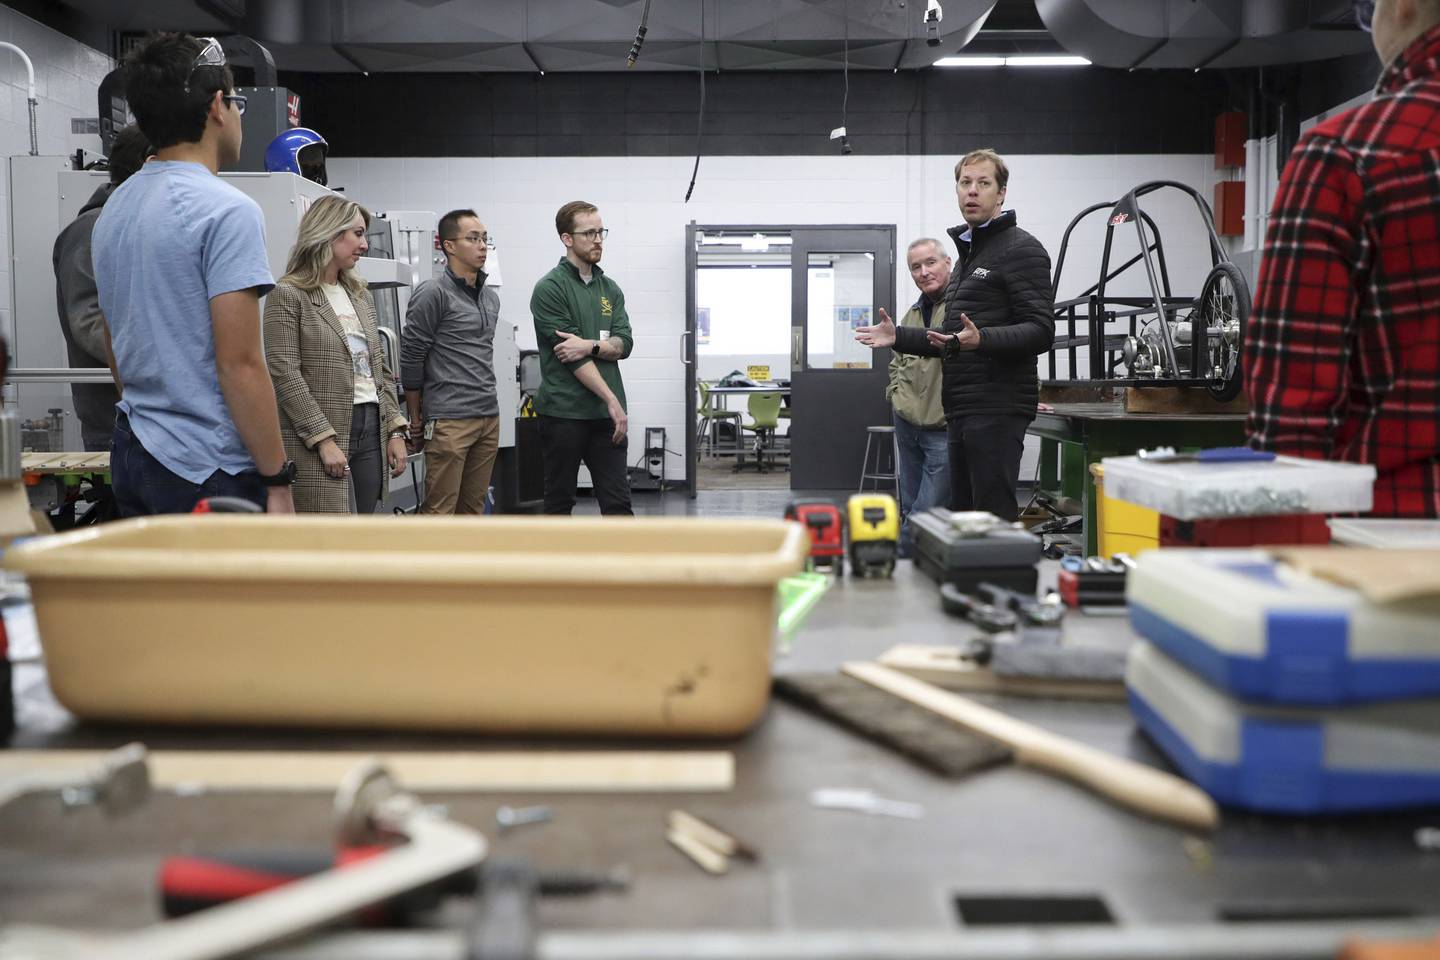 NASCAR driver Brad Keselowski, second from right, talks with students and staff inside the advanced manufacturing lab at Elk Grove Village High School on Oct. 17, 2022.  